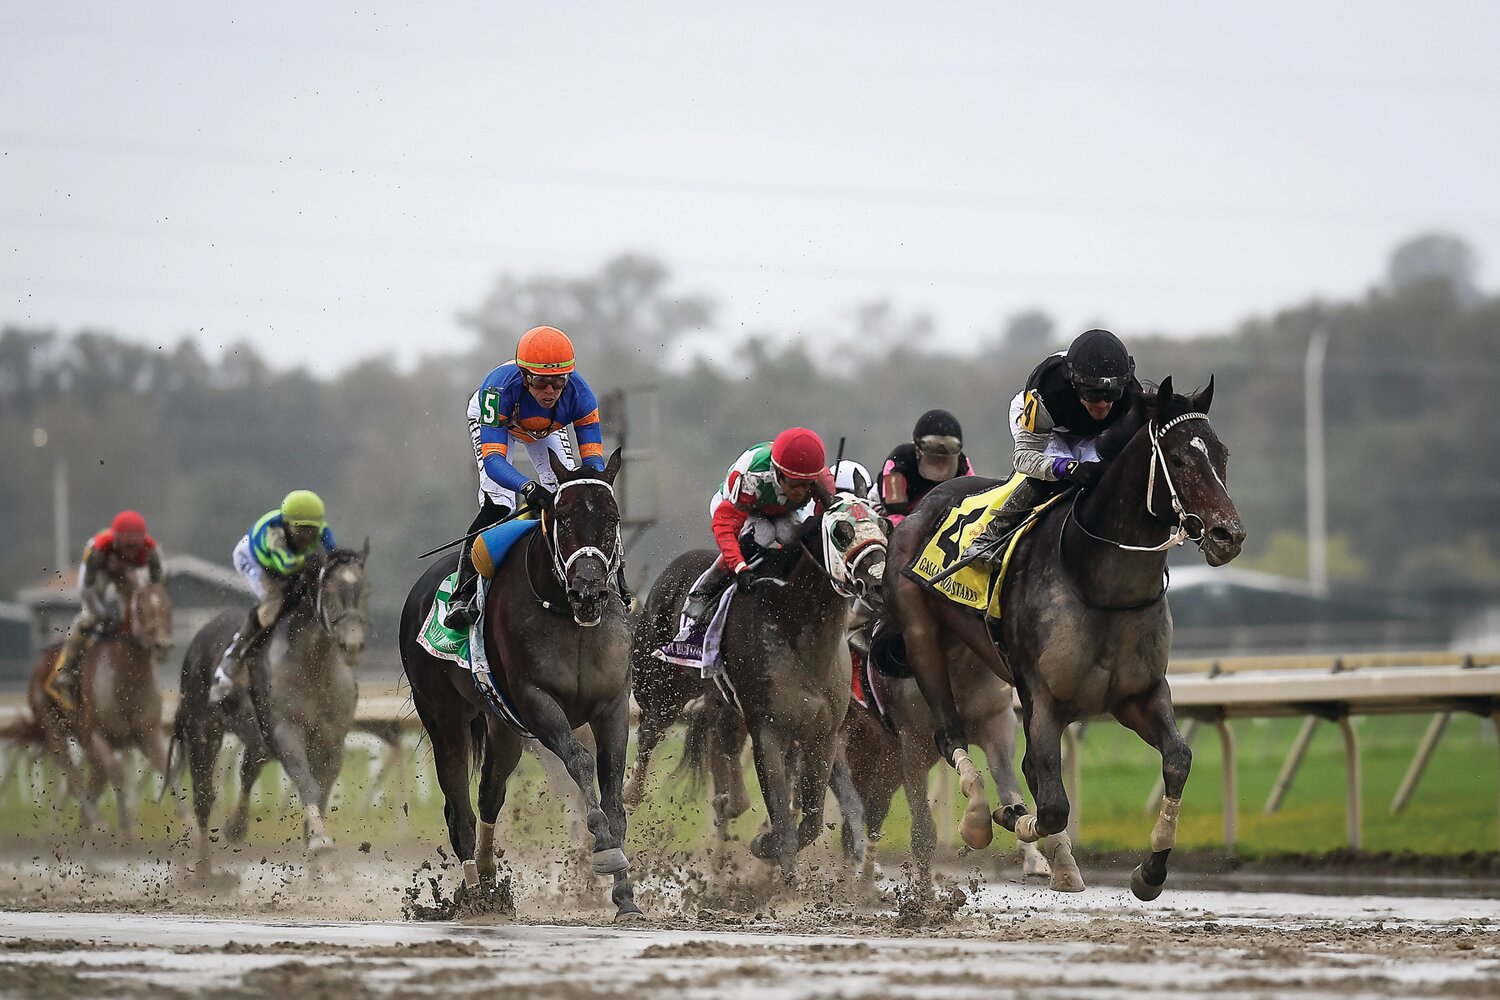 Damon’s Mound, ridden by jockey Junior Alvarado (No. 4), opens up the sprint in the home stretch to edge out Nautical Star, ridden by Irad Ortiz Jr. (No. 5) in race No. 11.